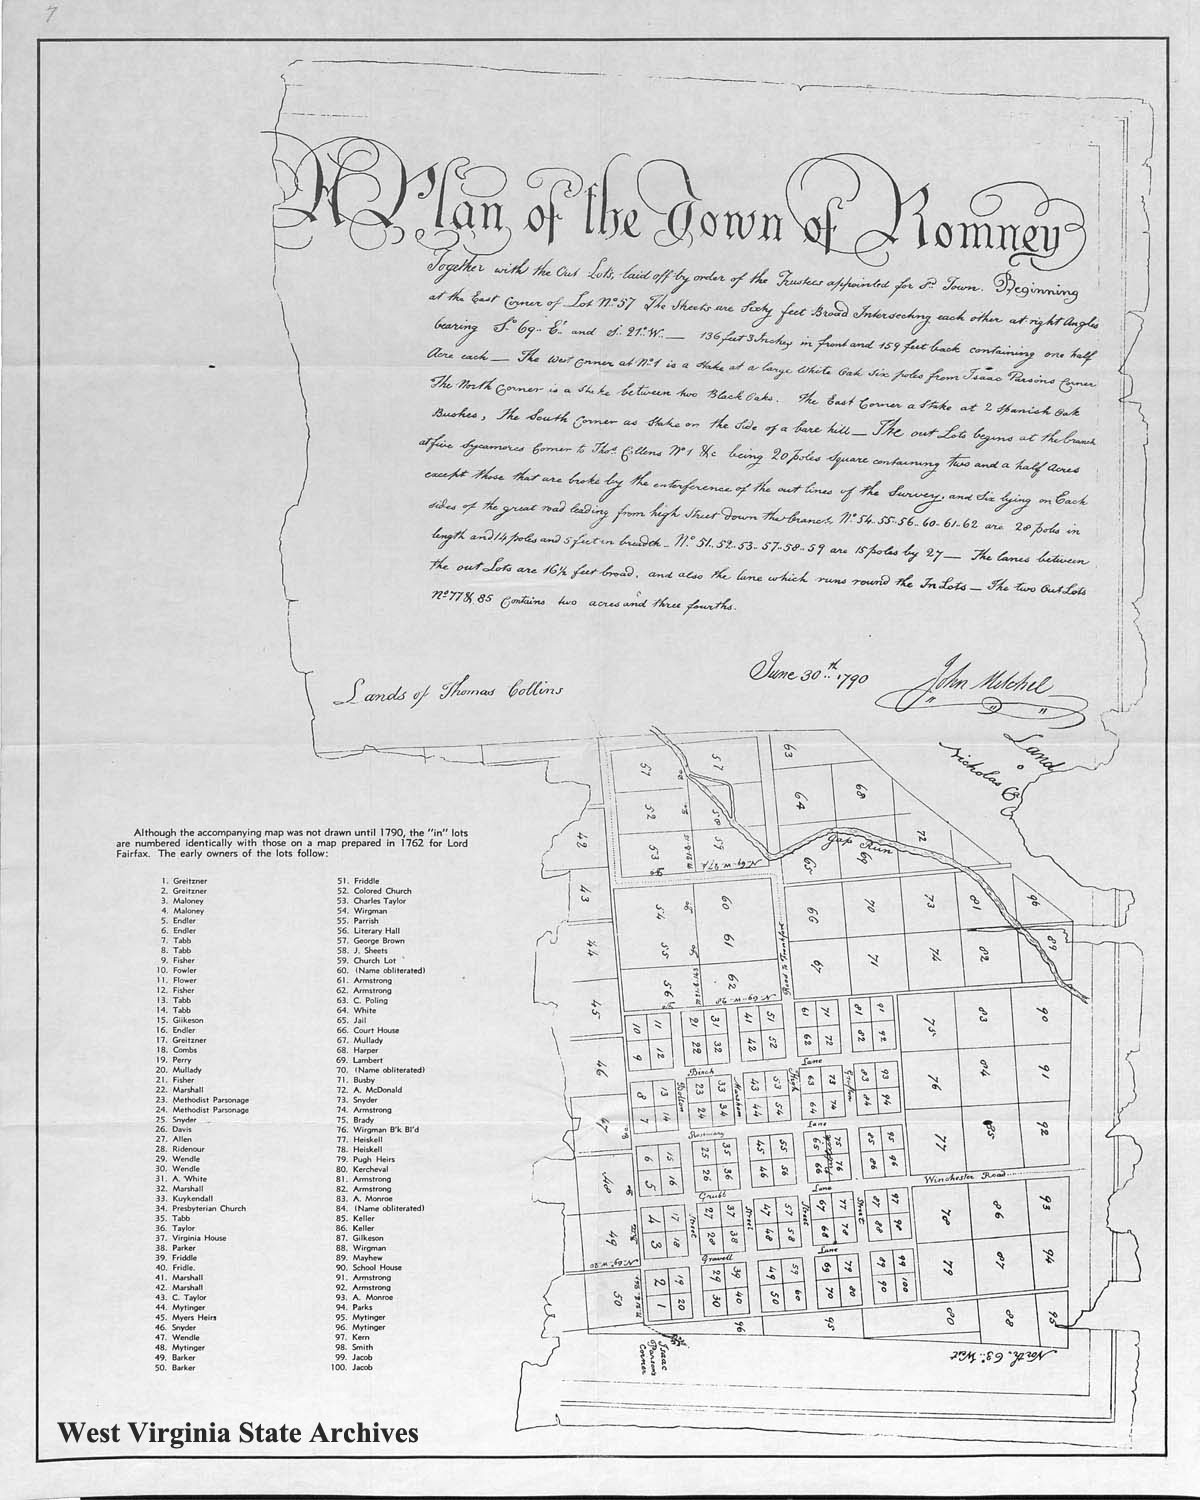 Plan of the town of Romney, 1790. (Ma24-7)